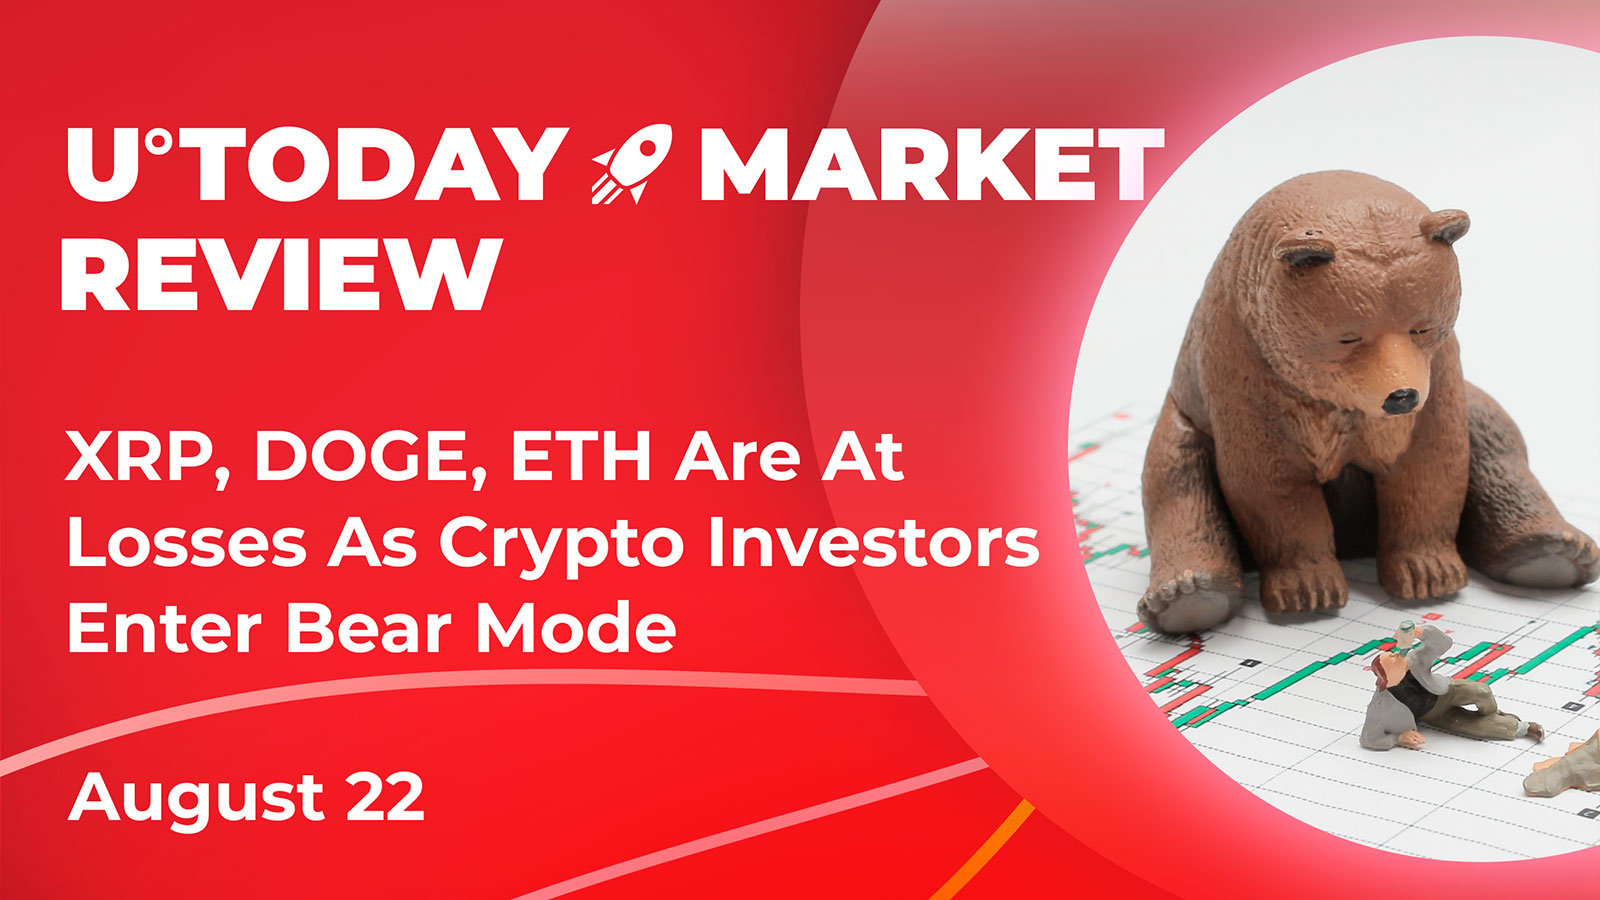 XRP, DOGE, ETH Are at Loss as Crypto Investors Enter Bear Mode: Crypto Market Review, August 22